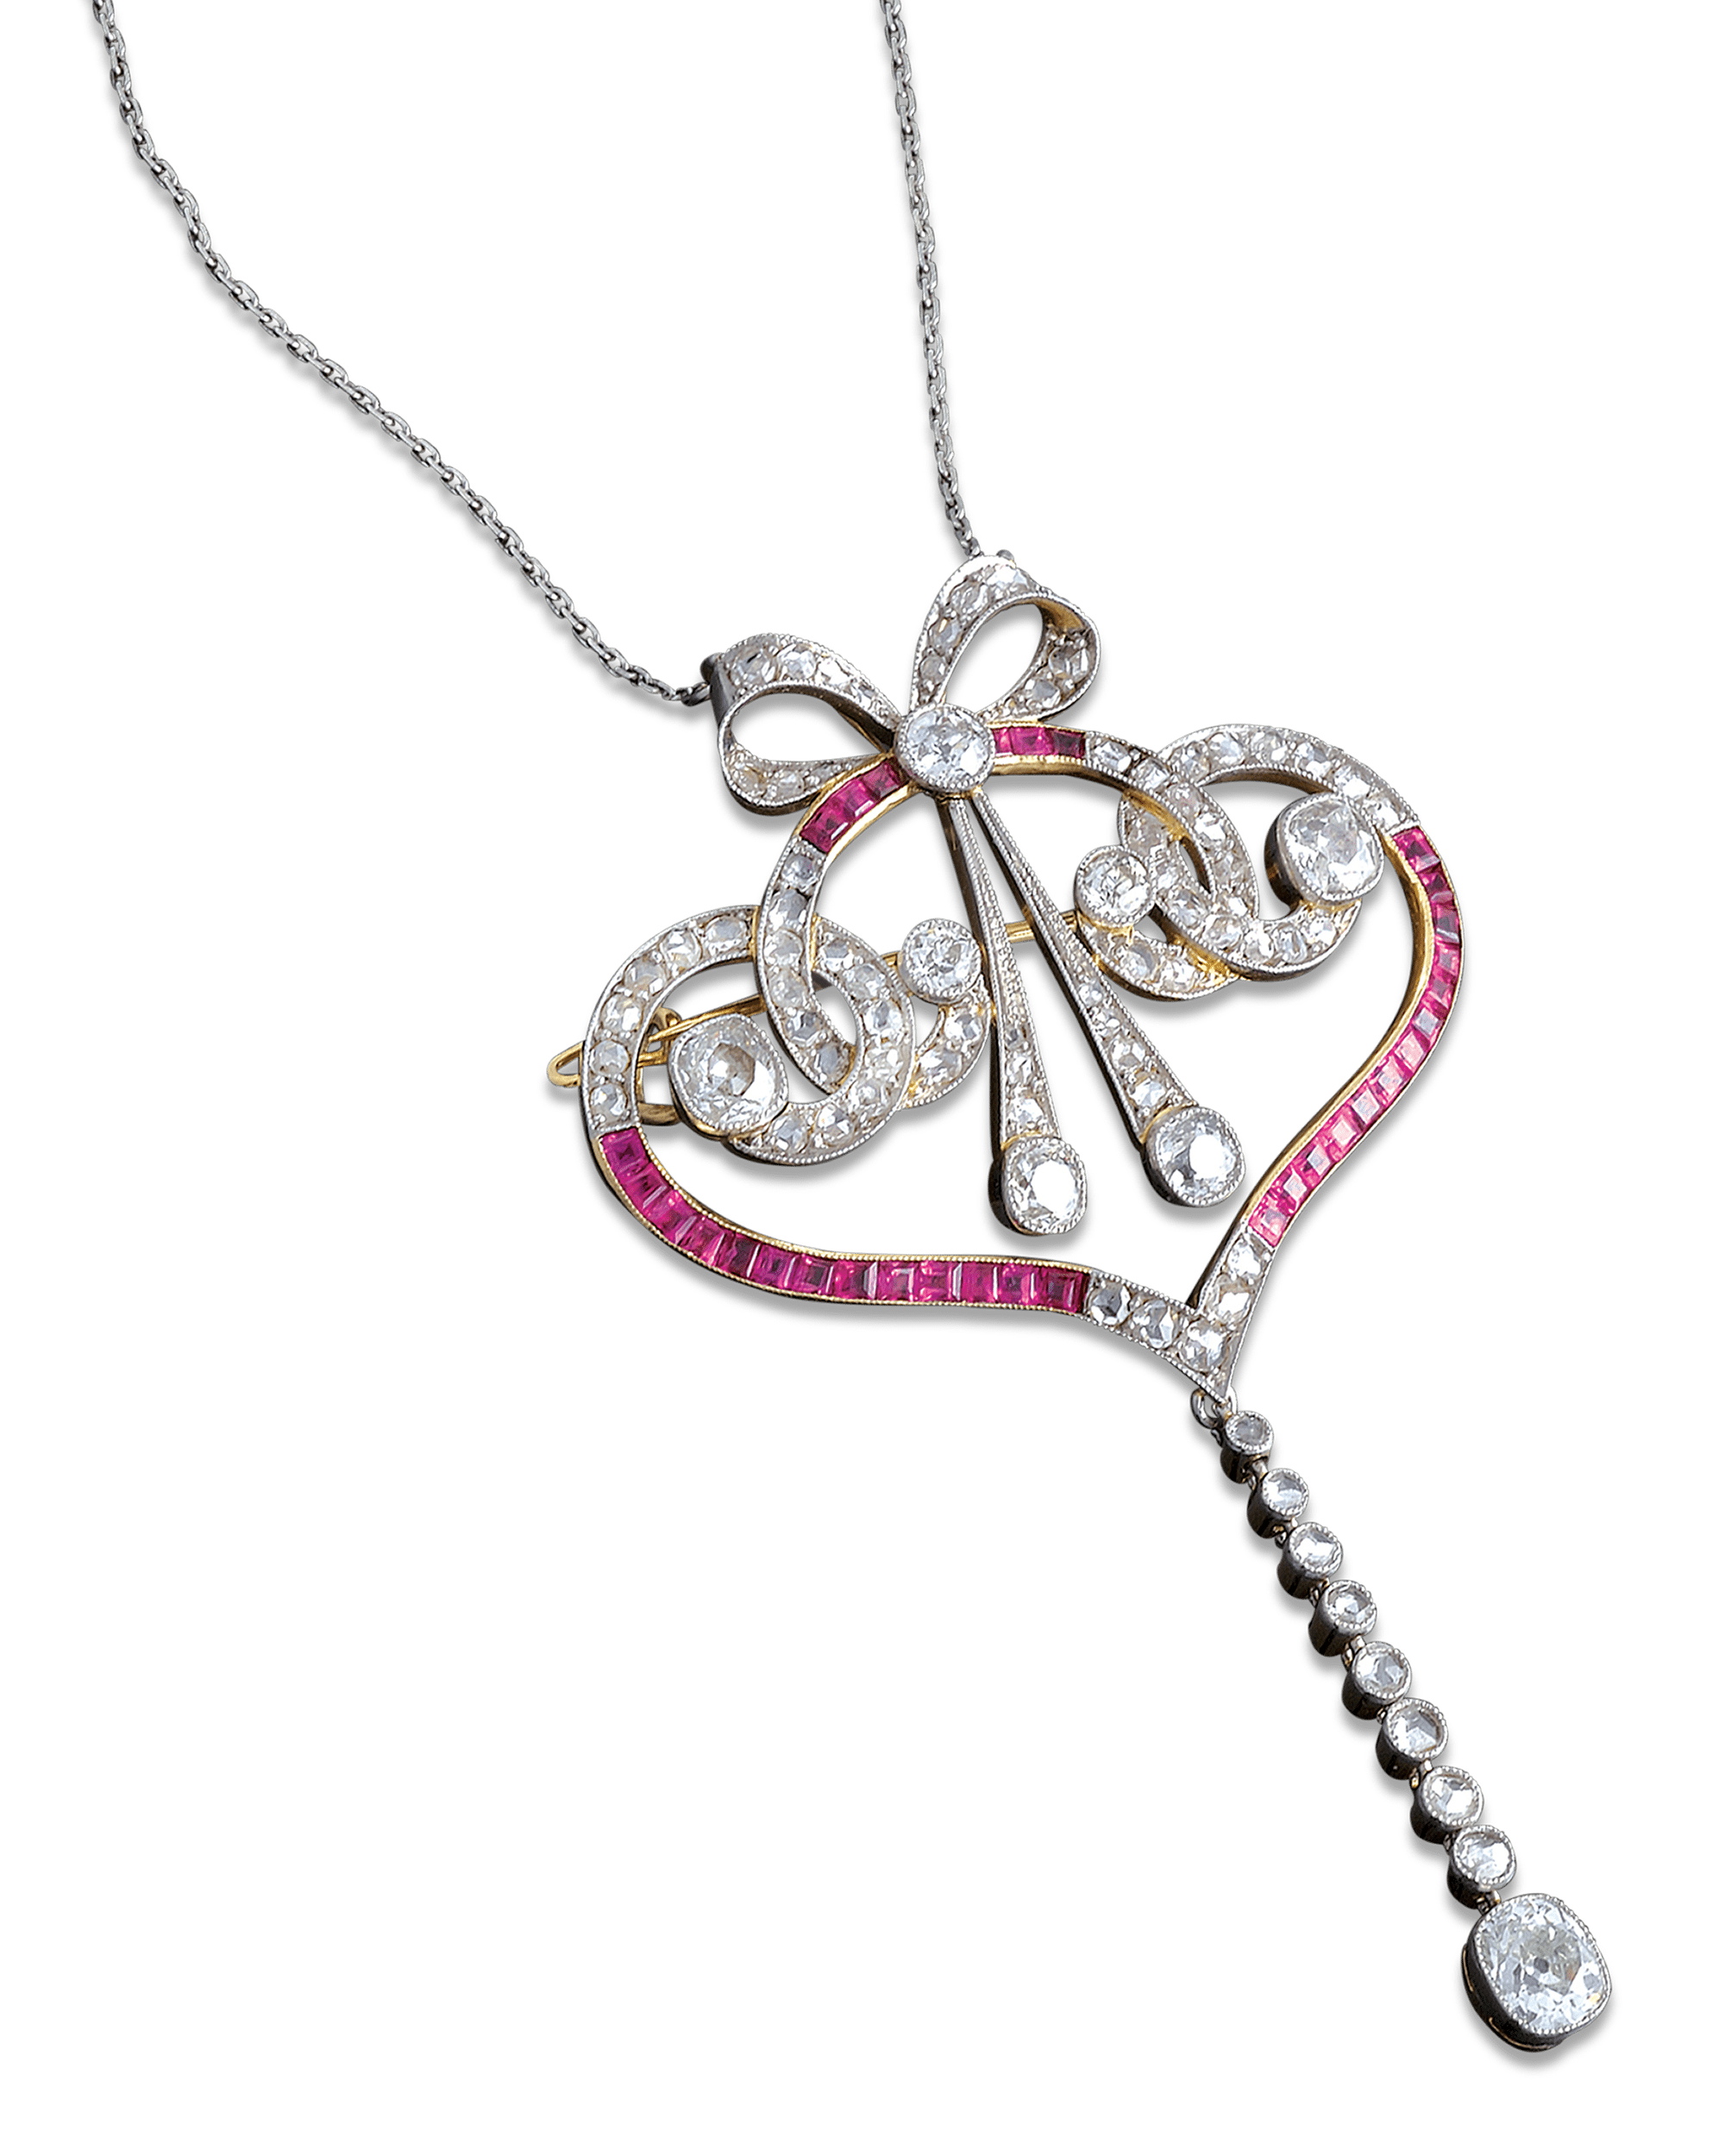 The elegance and refinement of the Edwardian period resonates in this diamond and ruby drop pendant